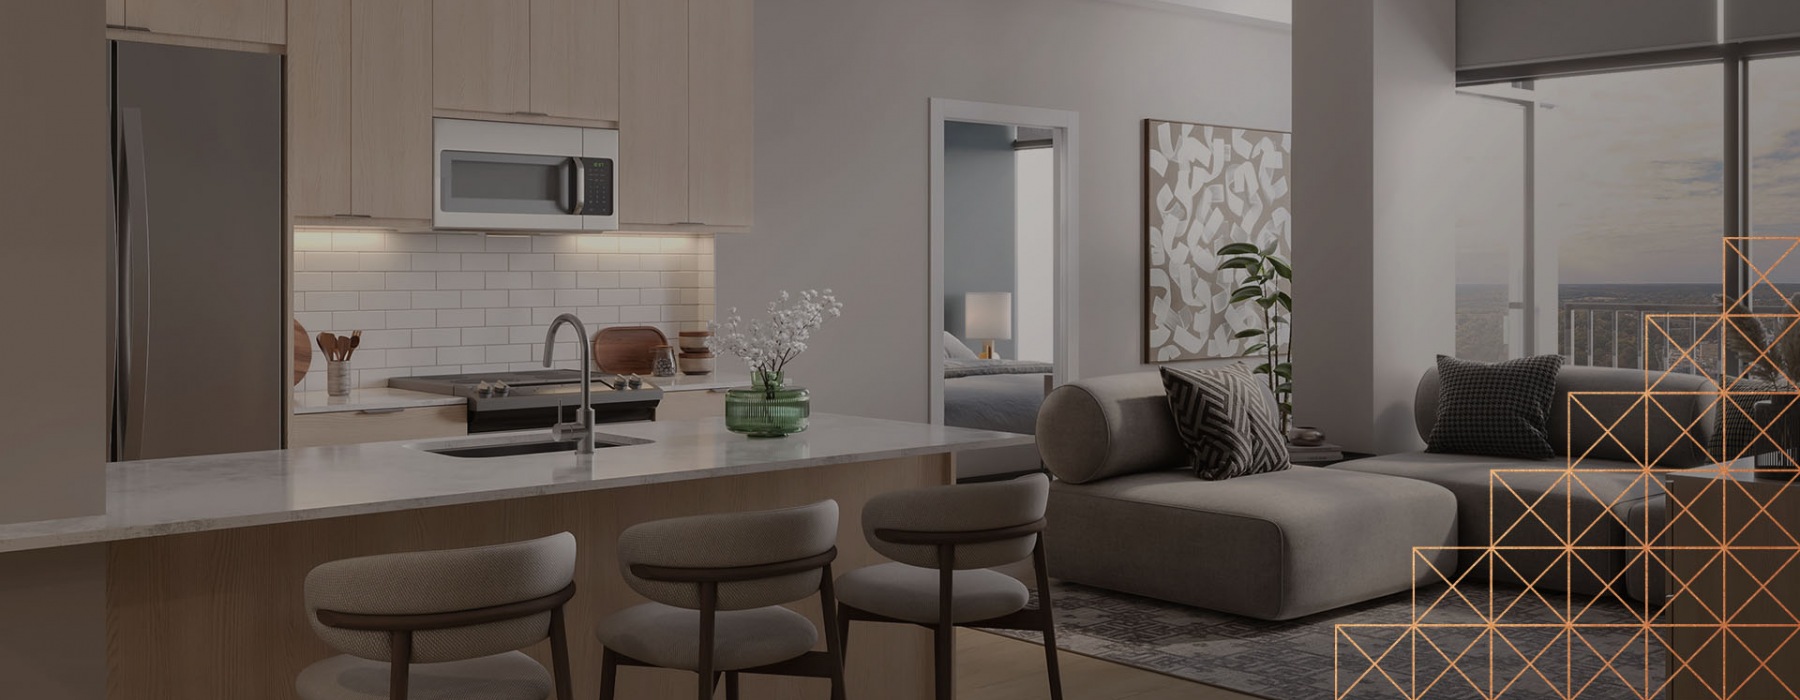 open living concept showing living room and kitchen combined with ample space for seating and modern living room decor